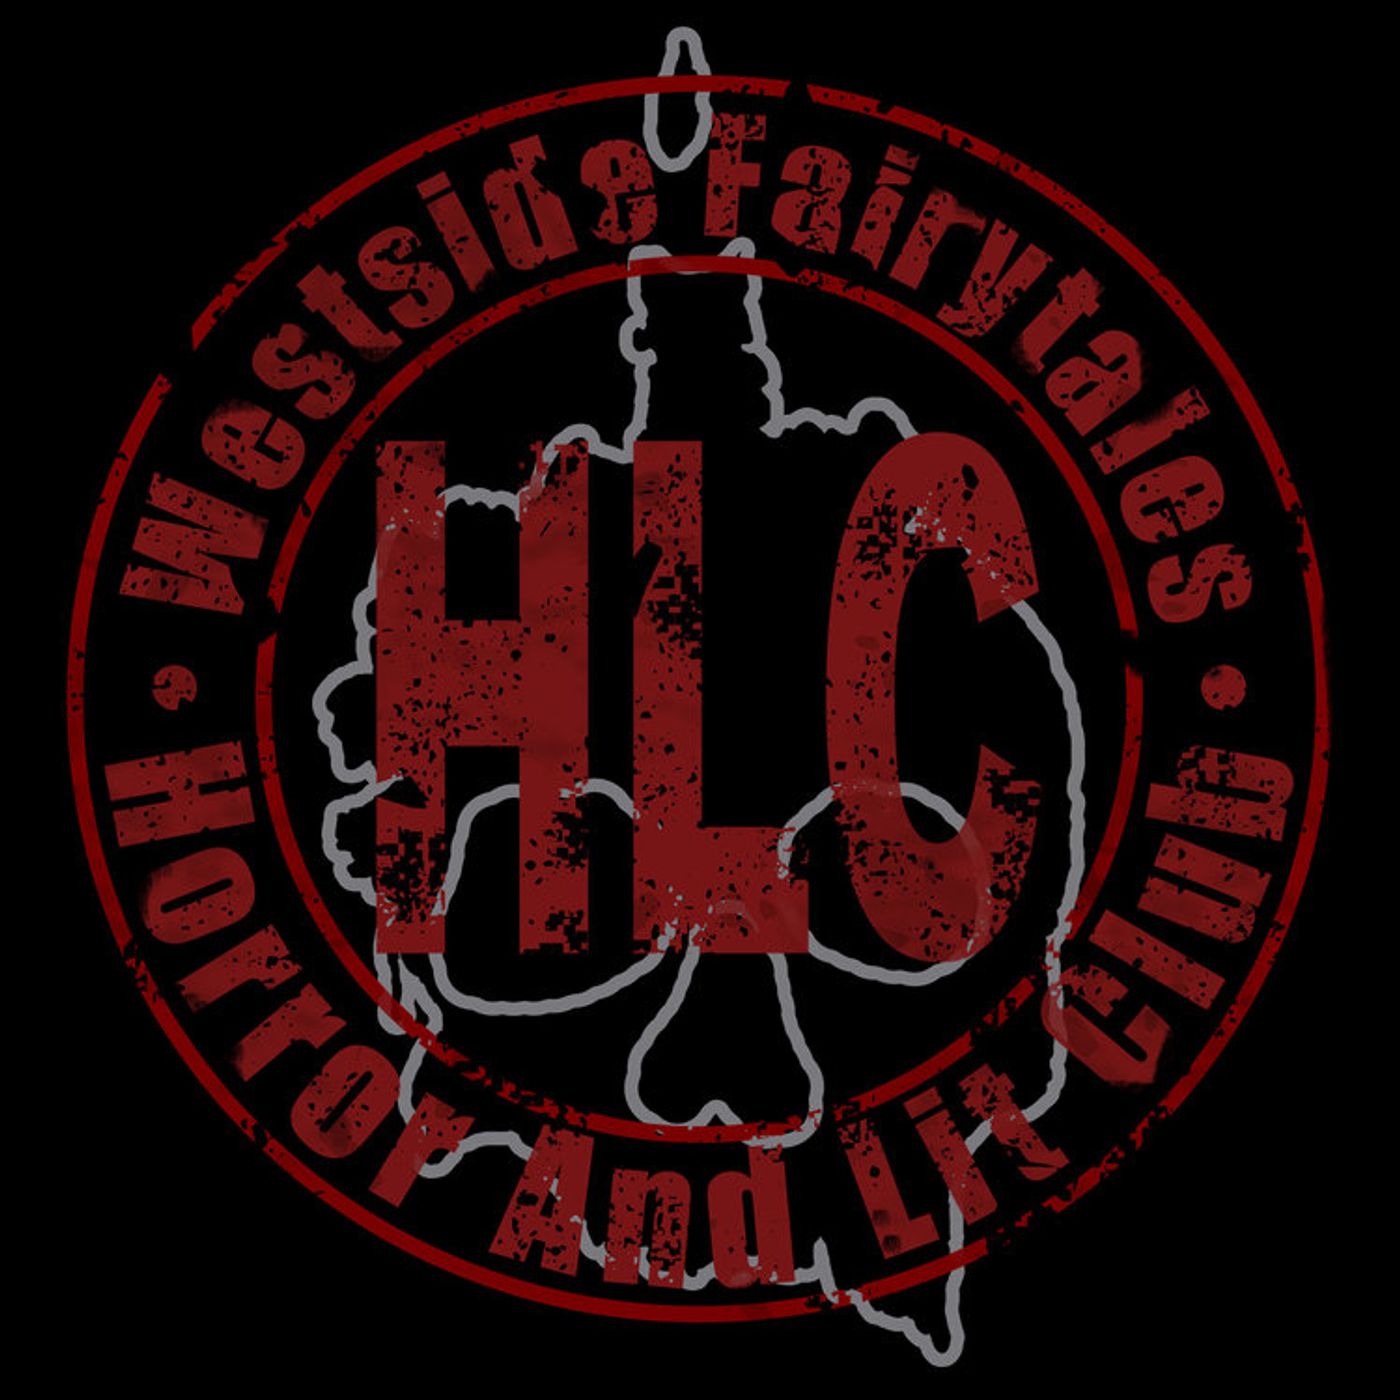 HLC - Completely rewriting 